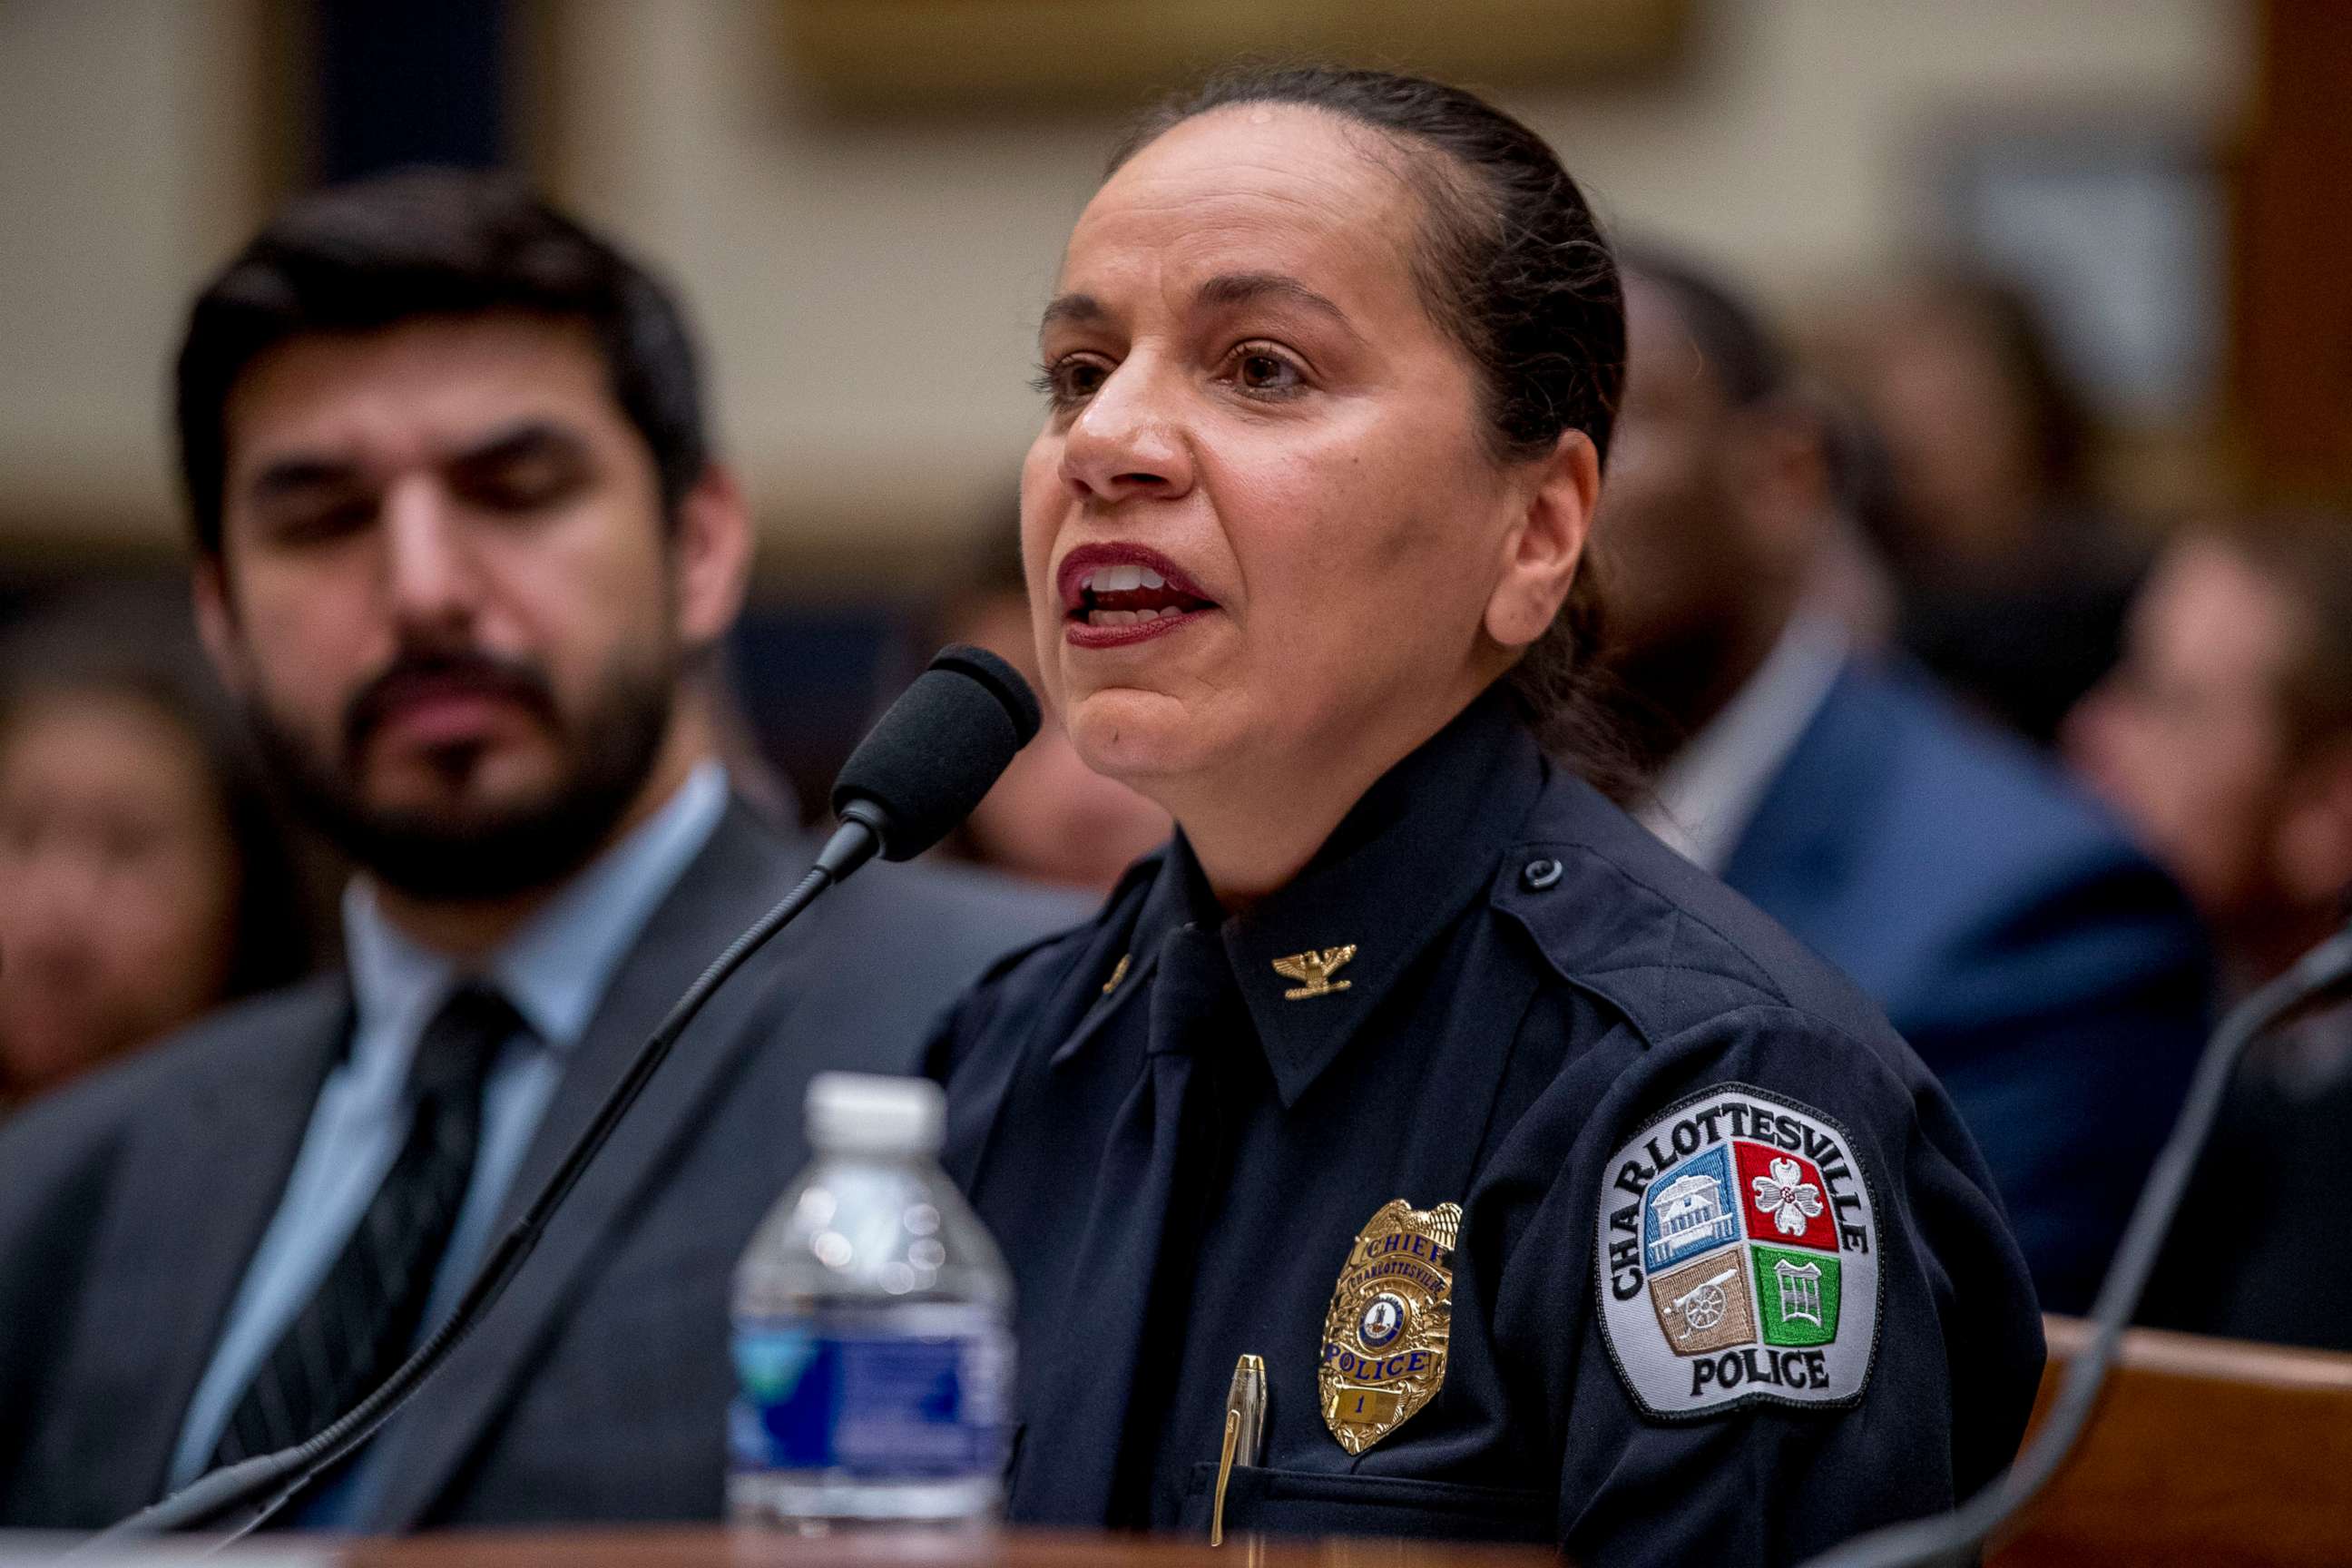 PHOTO: In this Sept. 25, 2019, file photo, Charlottesville Chief of Police RaShall Brackney speaks at a House Judiciary Committee hearing on assault weapons on Capitol Hill in Washington.